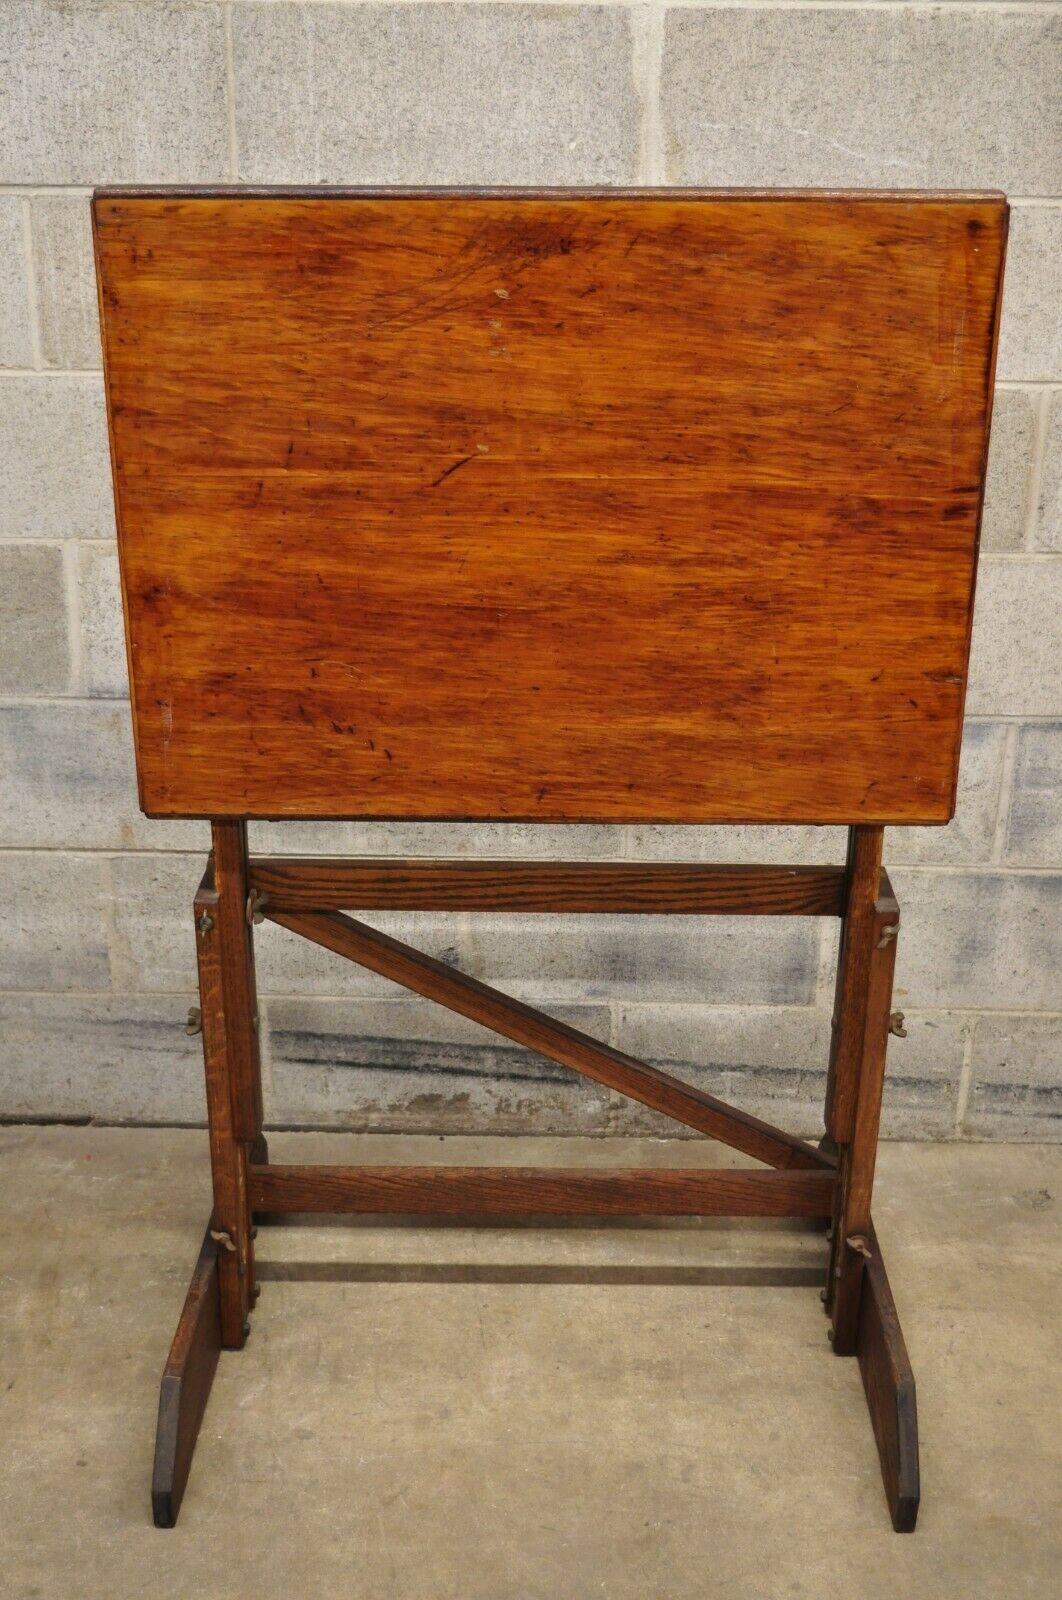 Antique American Industrial oak wood adjustable artist drafting table work desk. Item features a pivoting top, adjustable height, solid wood construction, beautiful wood grain, very nice antique item, great style and form. Circa Mid 20th Century.